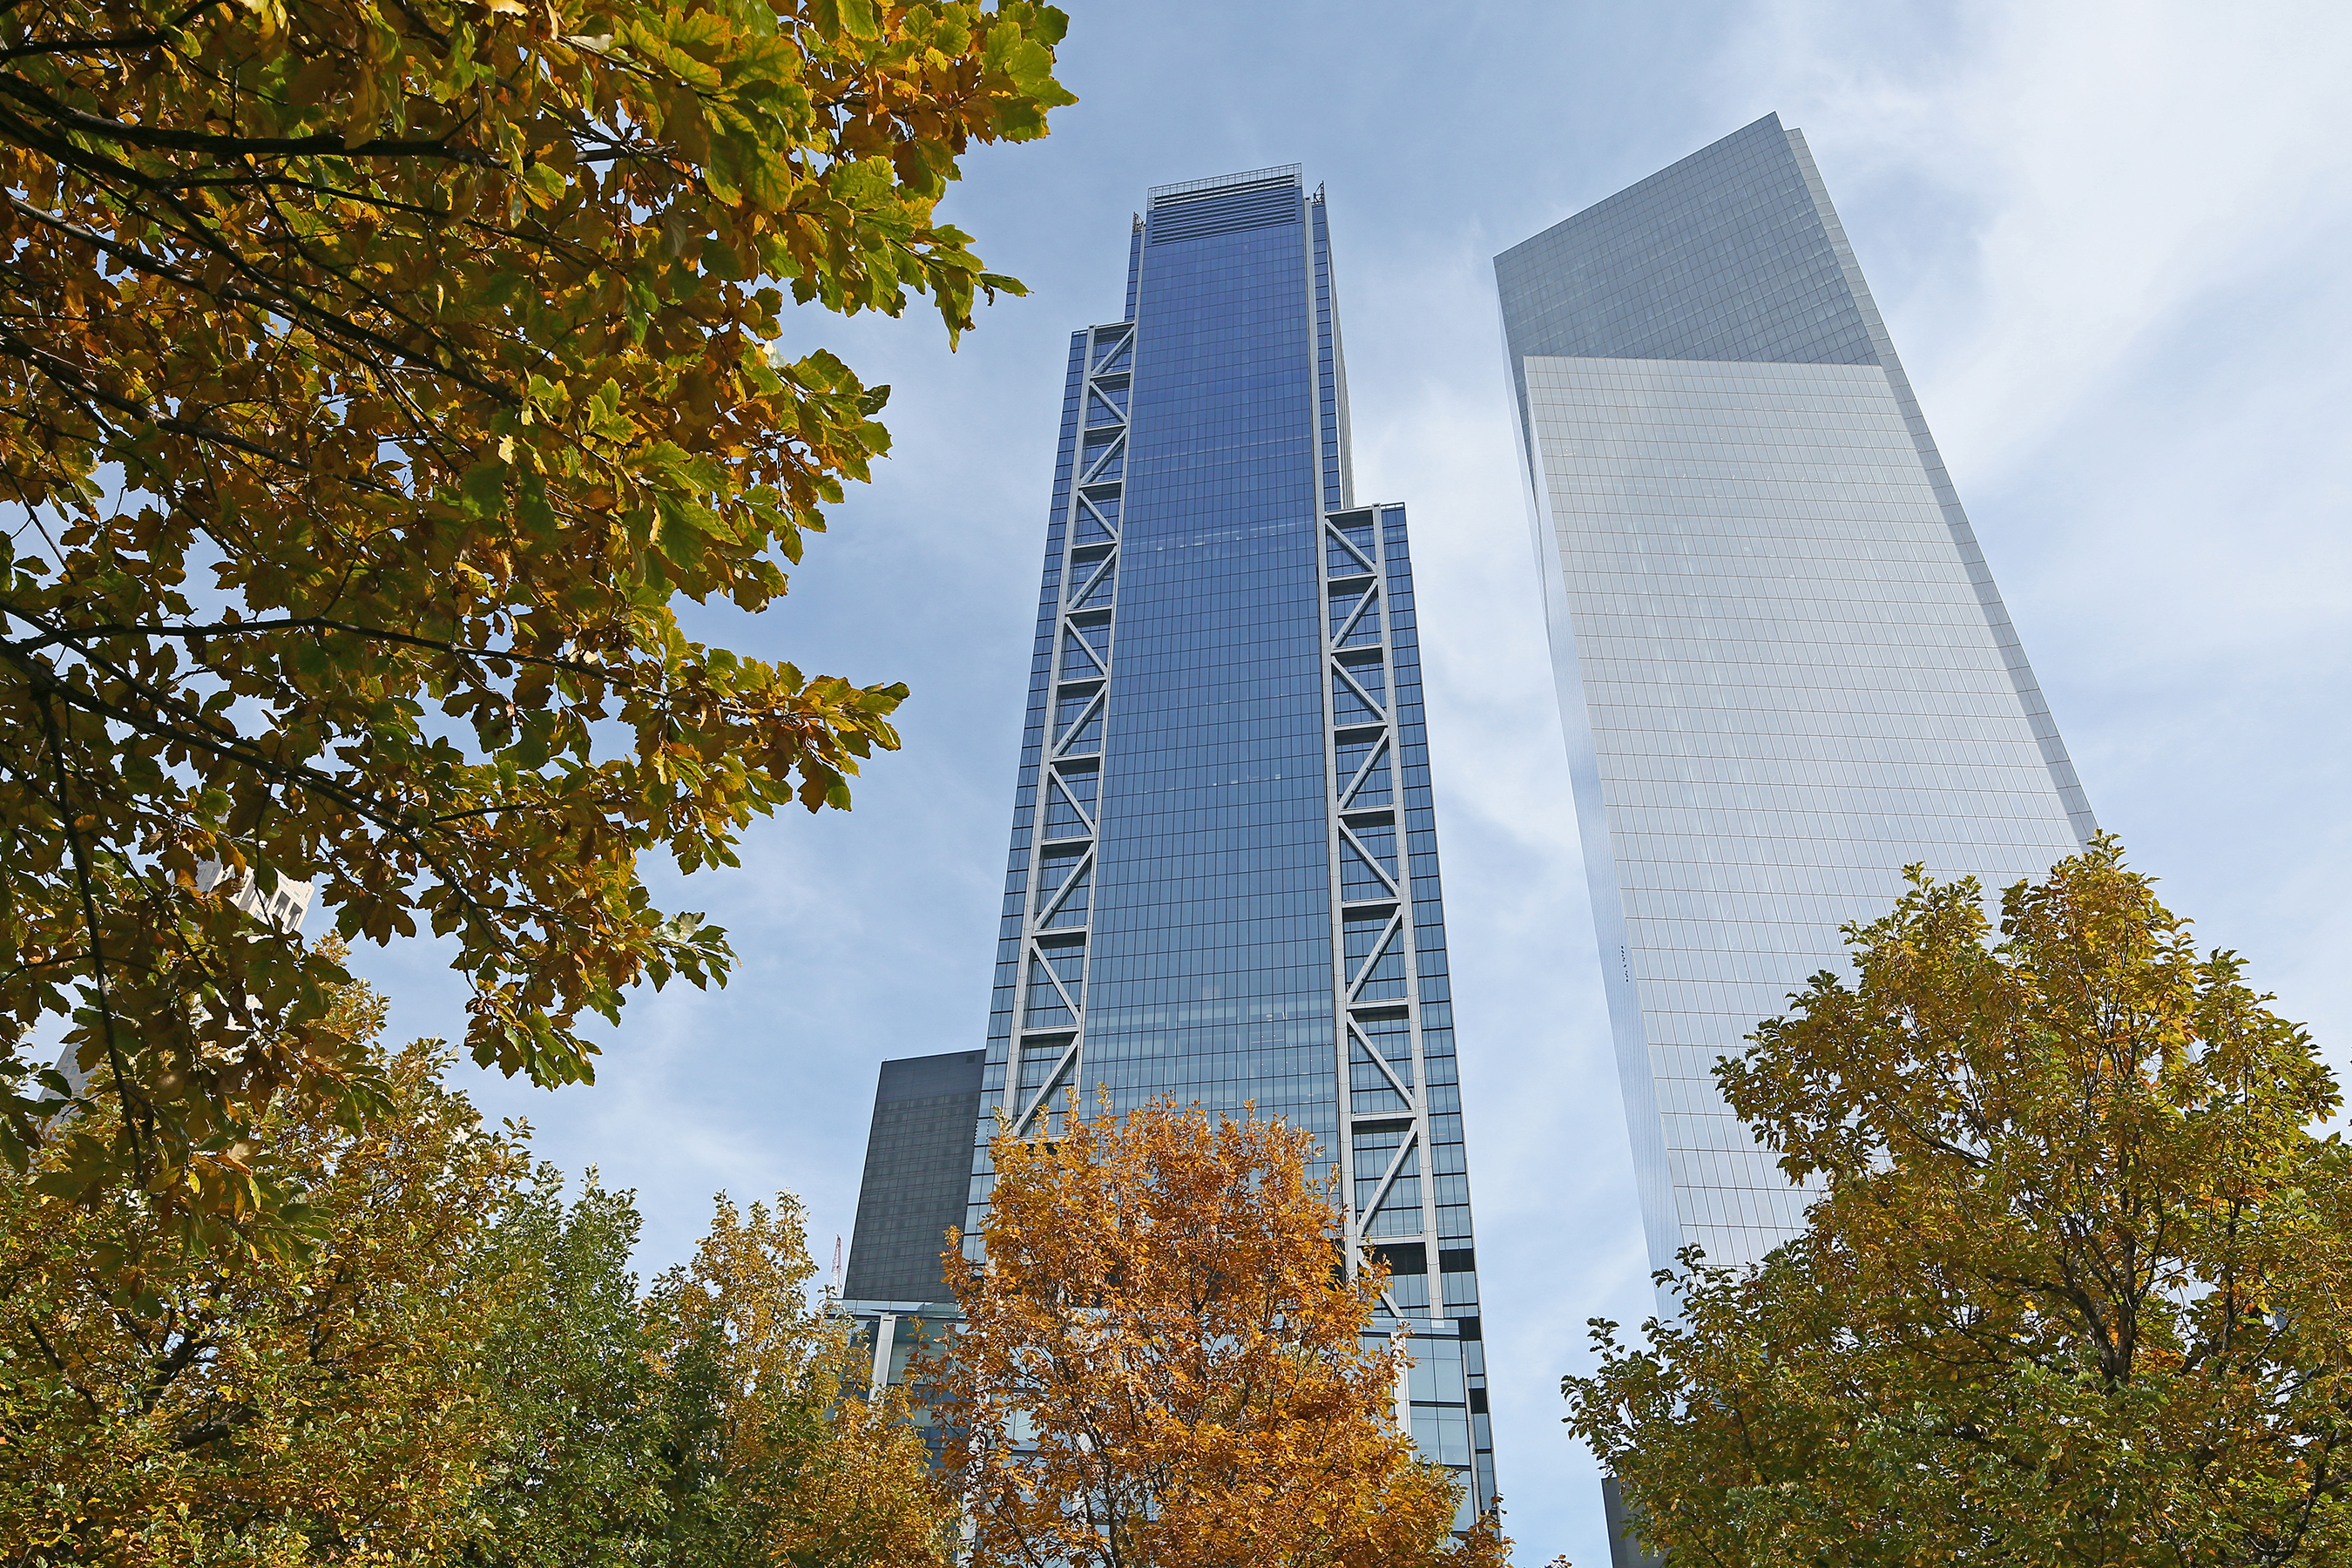 Better.com takes 44,000 s/f at 3 World Trade Center